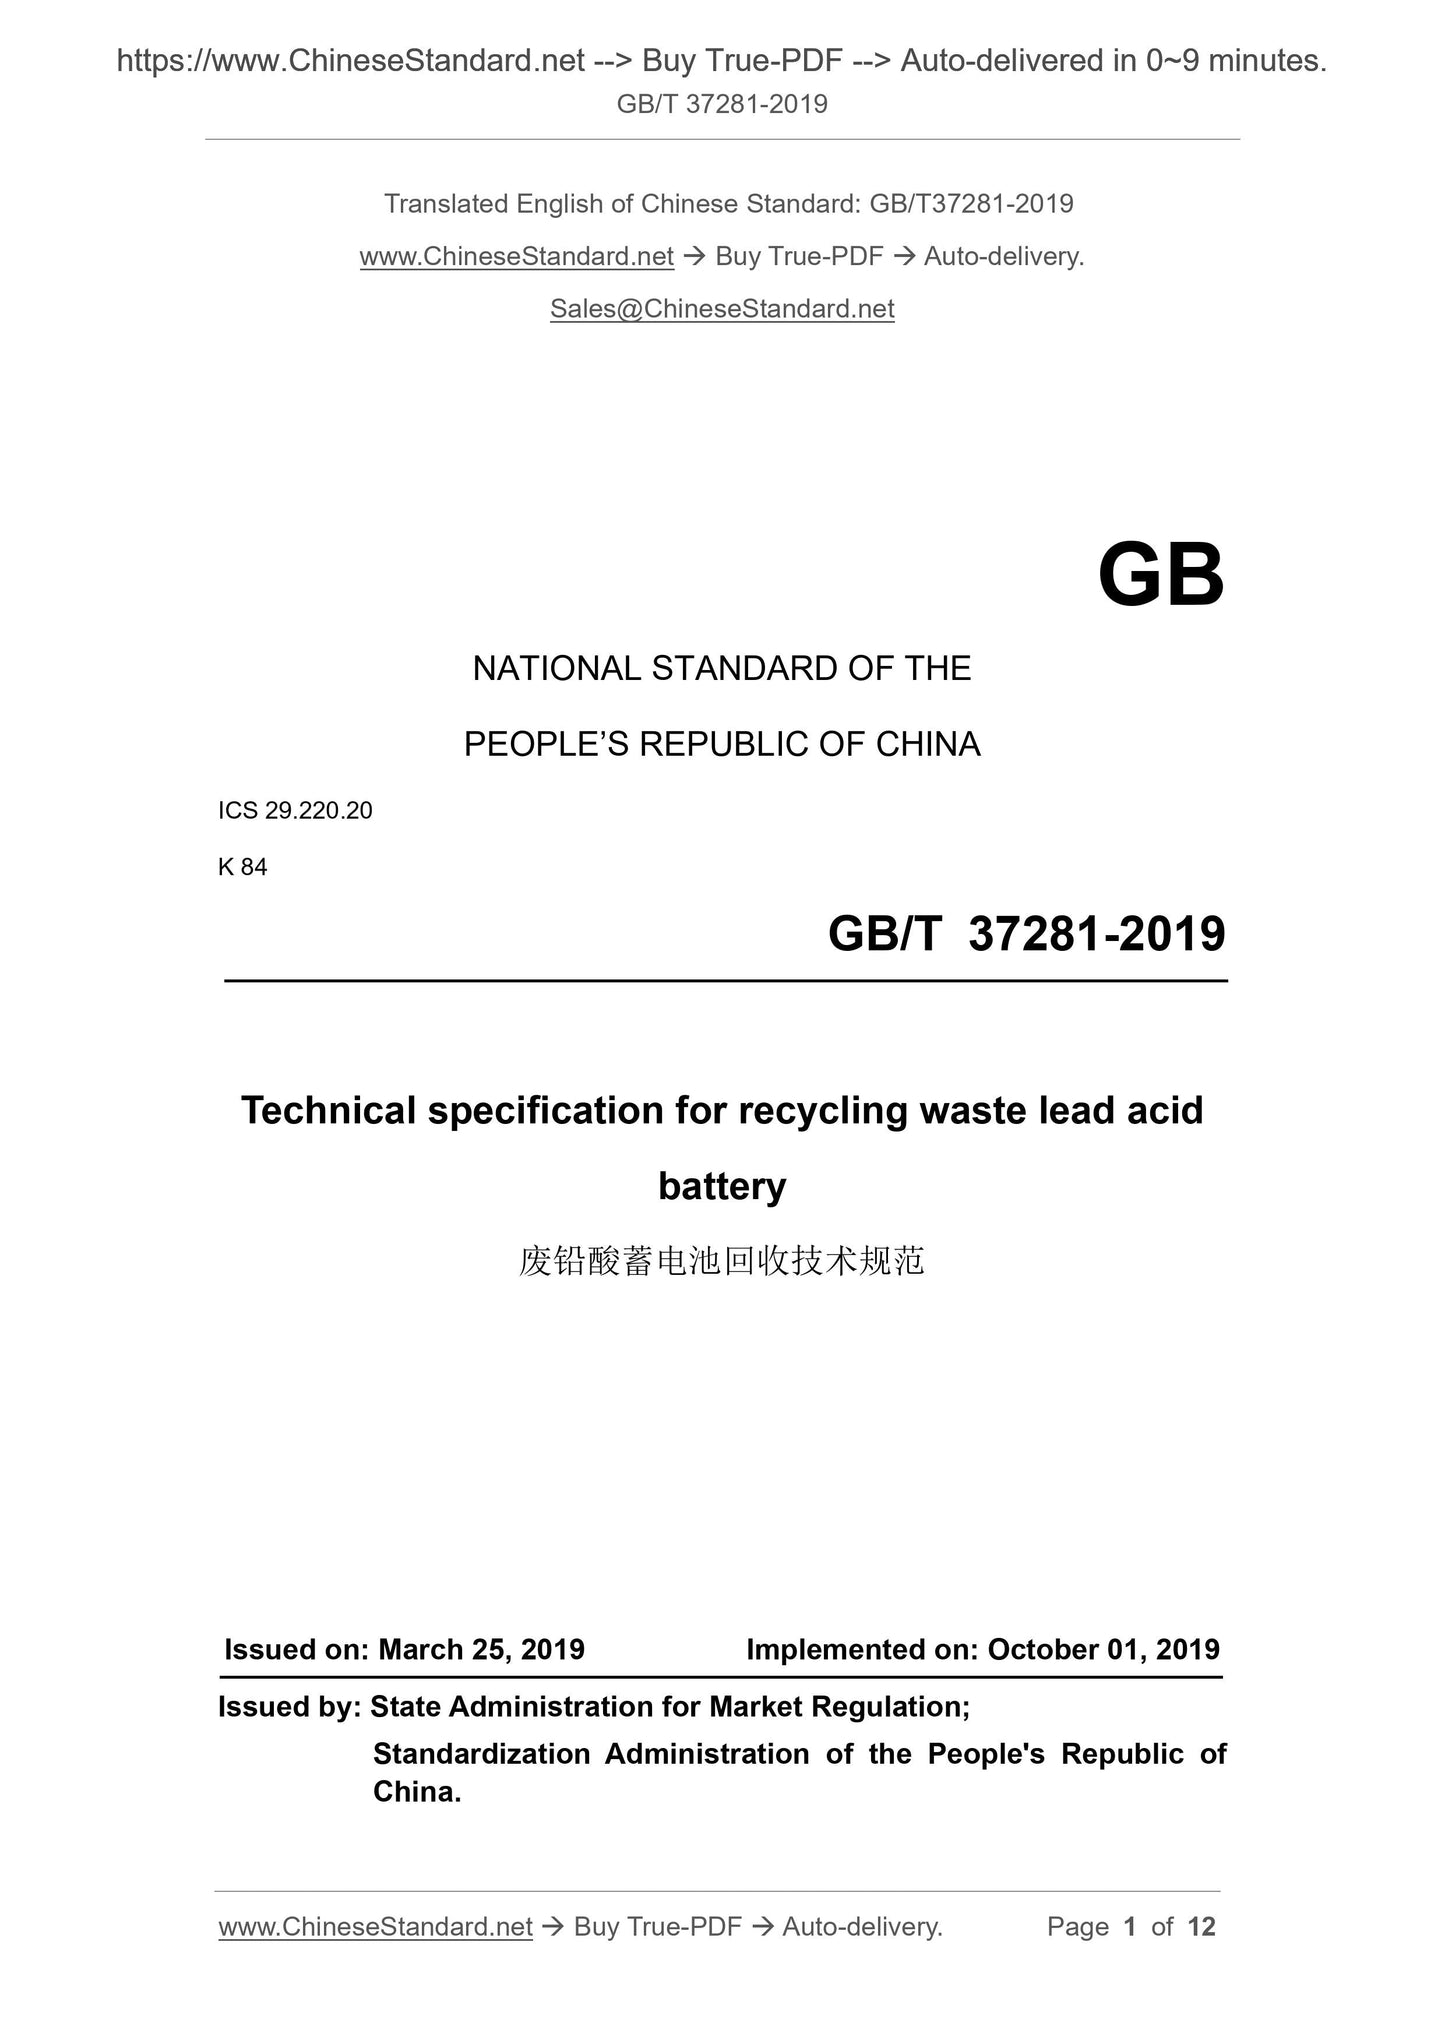 GB/T 37281-2019 Page 1